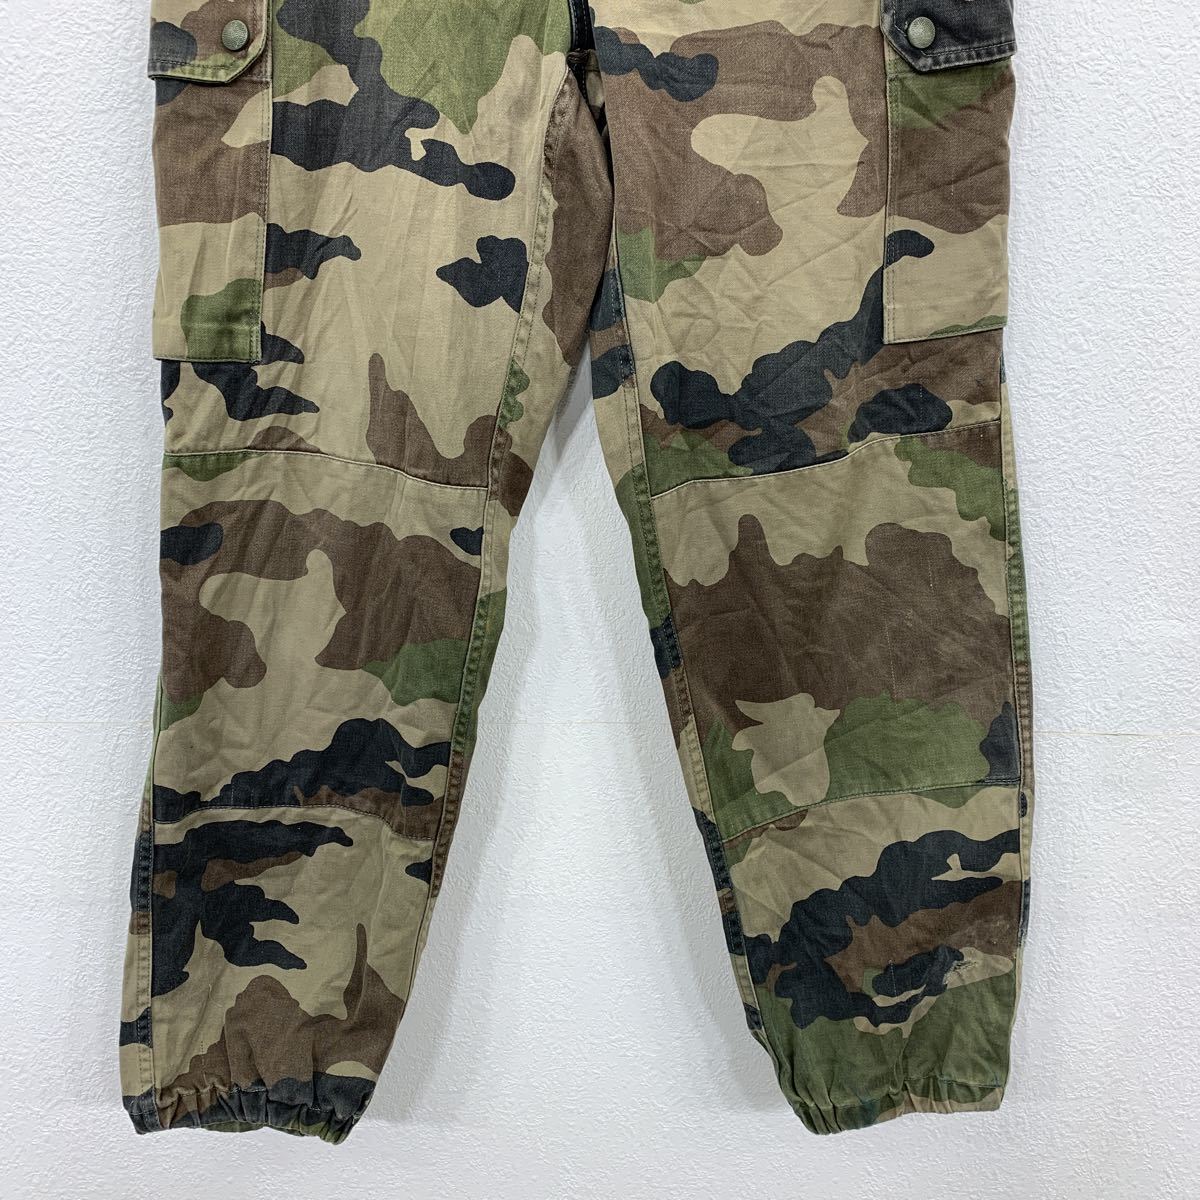  cargo pants W28 camouflage camouflage total pattern khaki olive color old clothes . America buying up 2304-1607